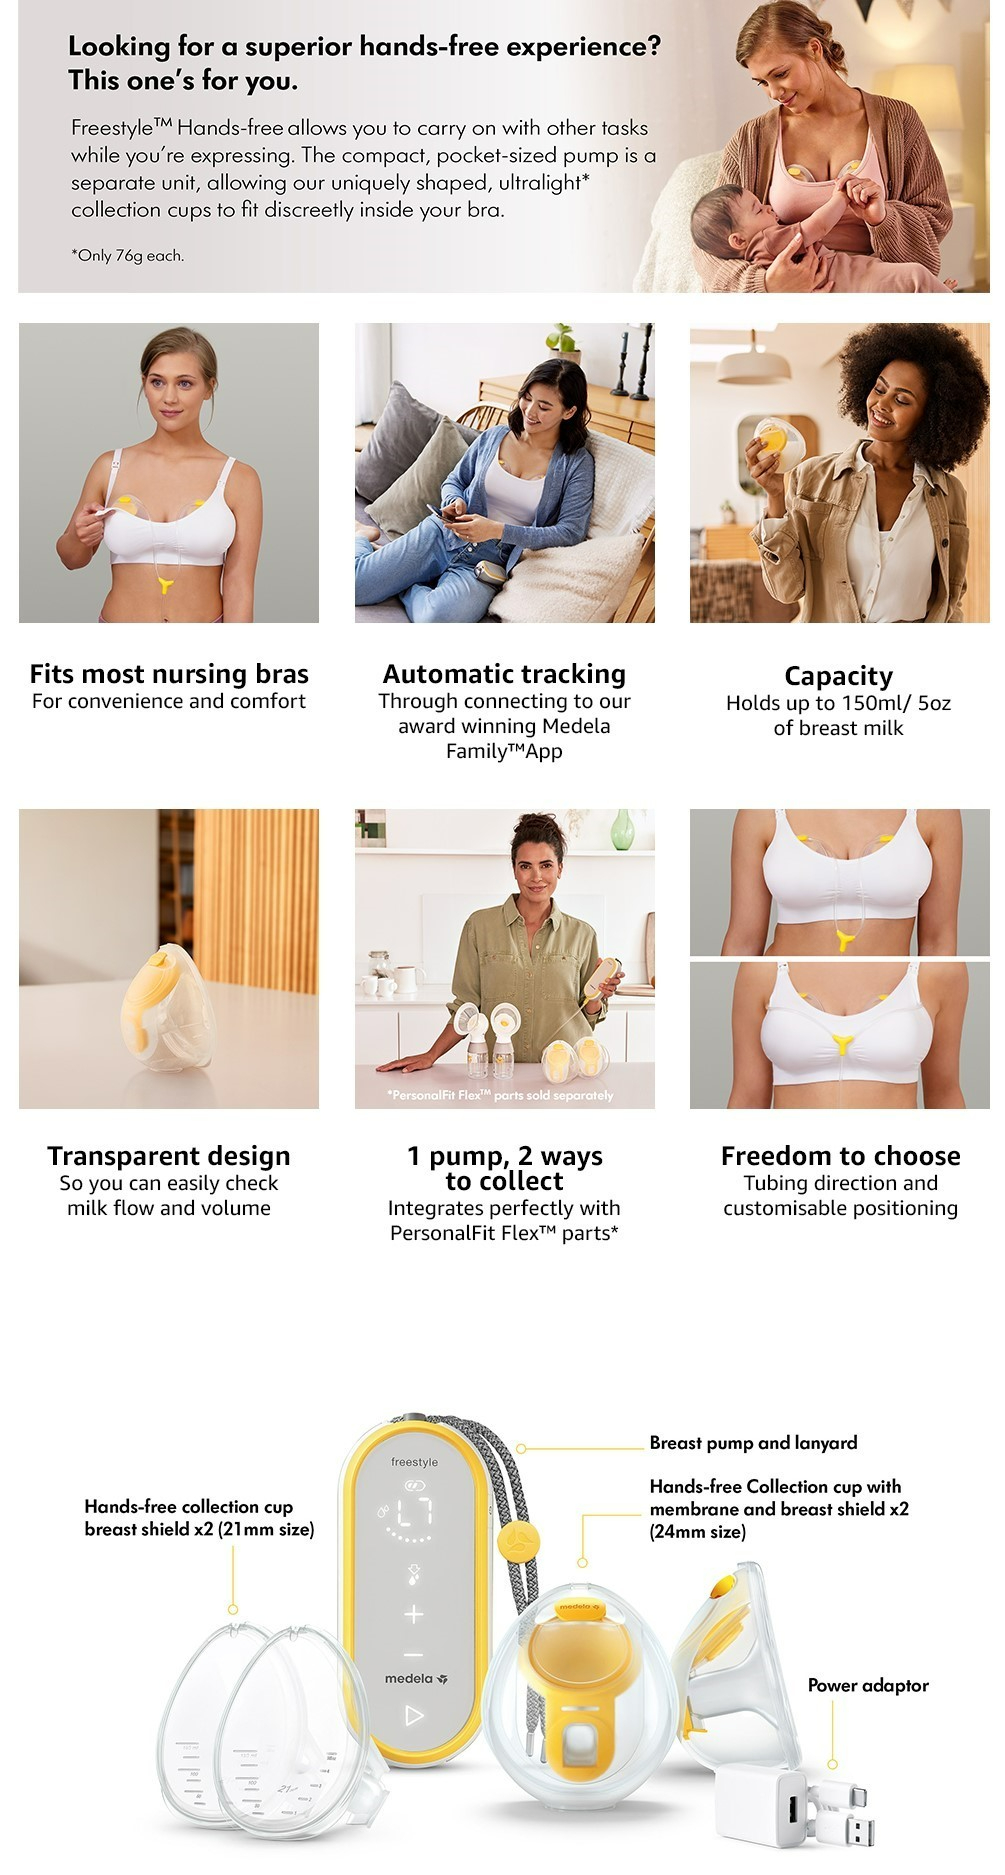 Breast Shields, Hands-free Collection Cups